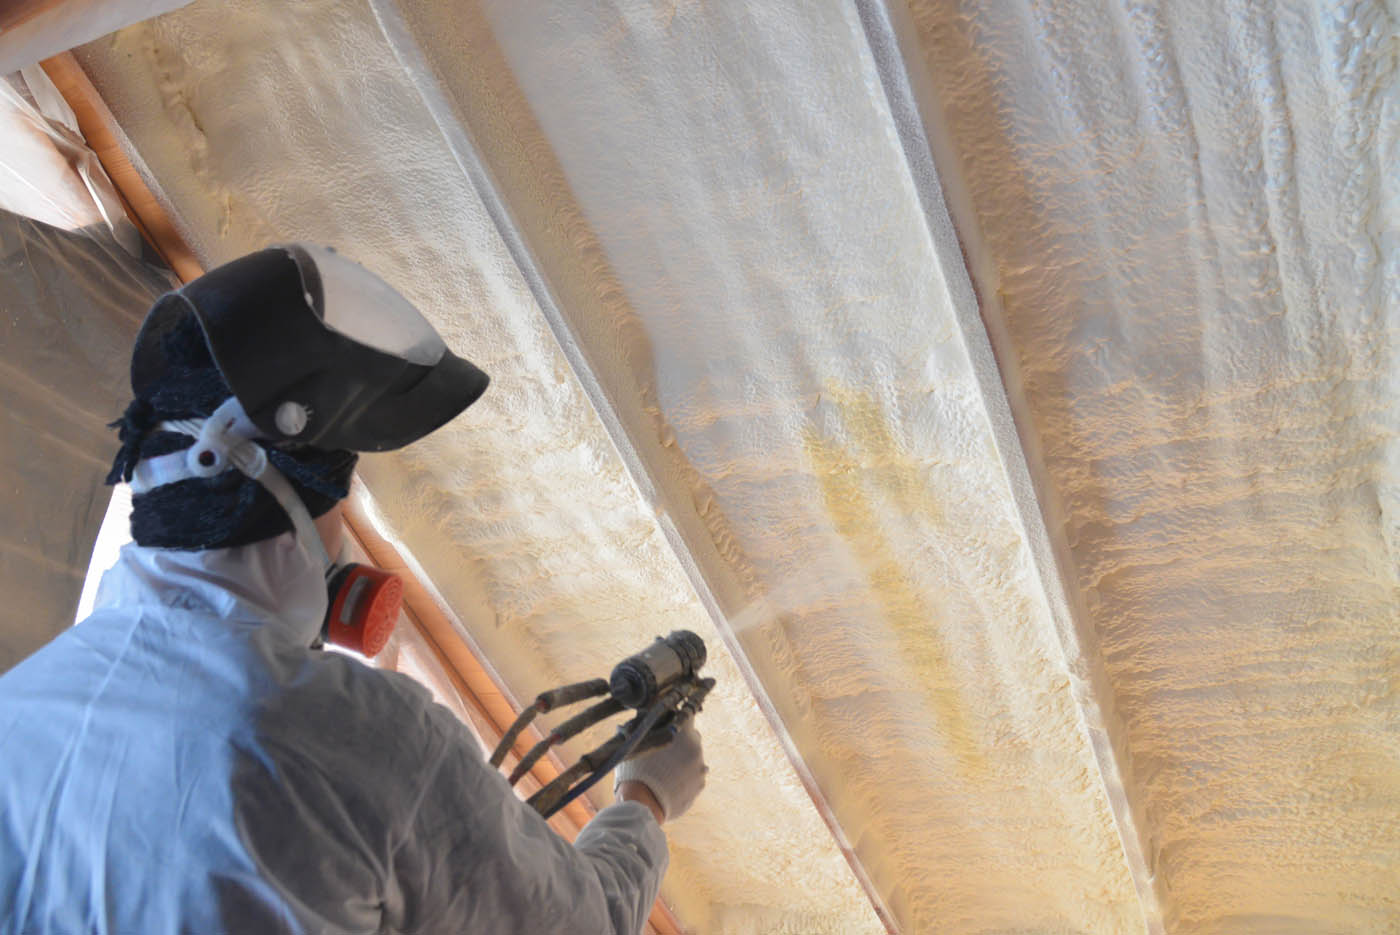 iFoam spray insulation installers working on a basement ceiling to improve heating and air efficency.